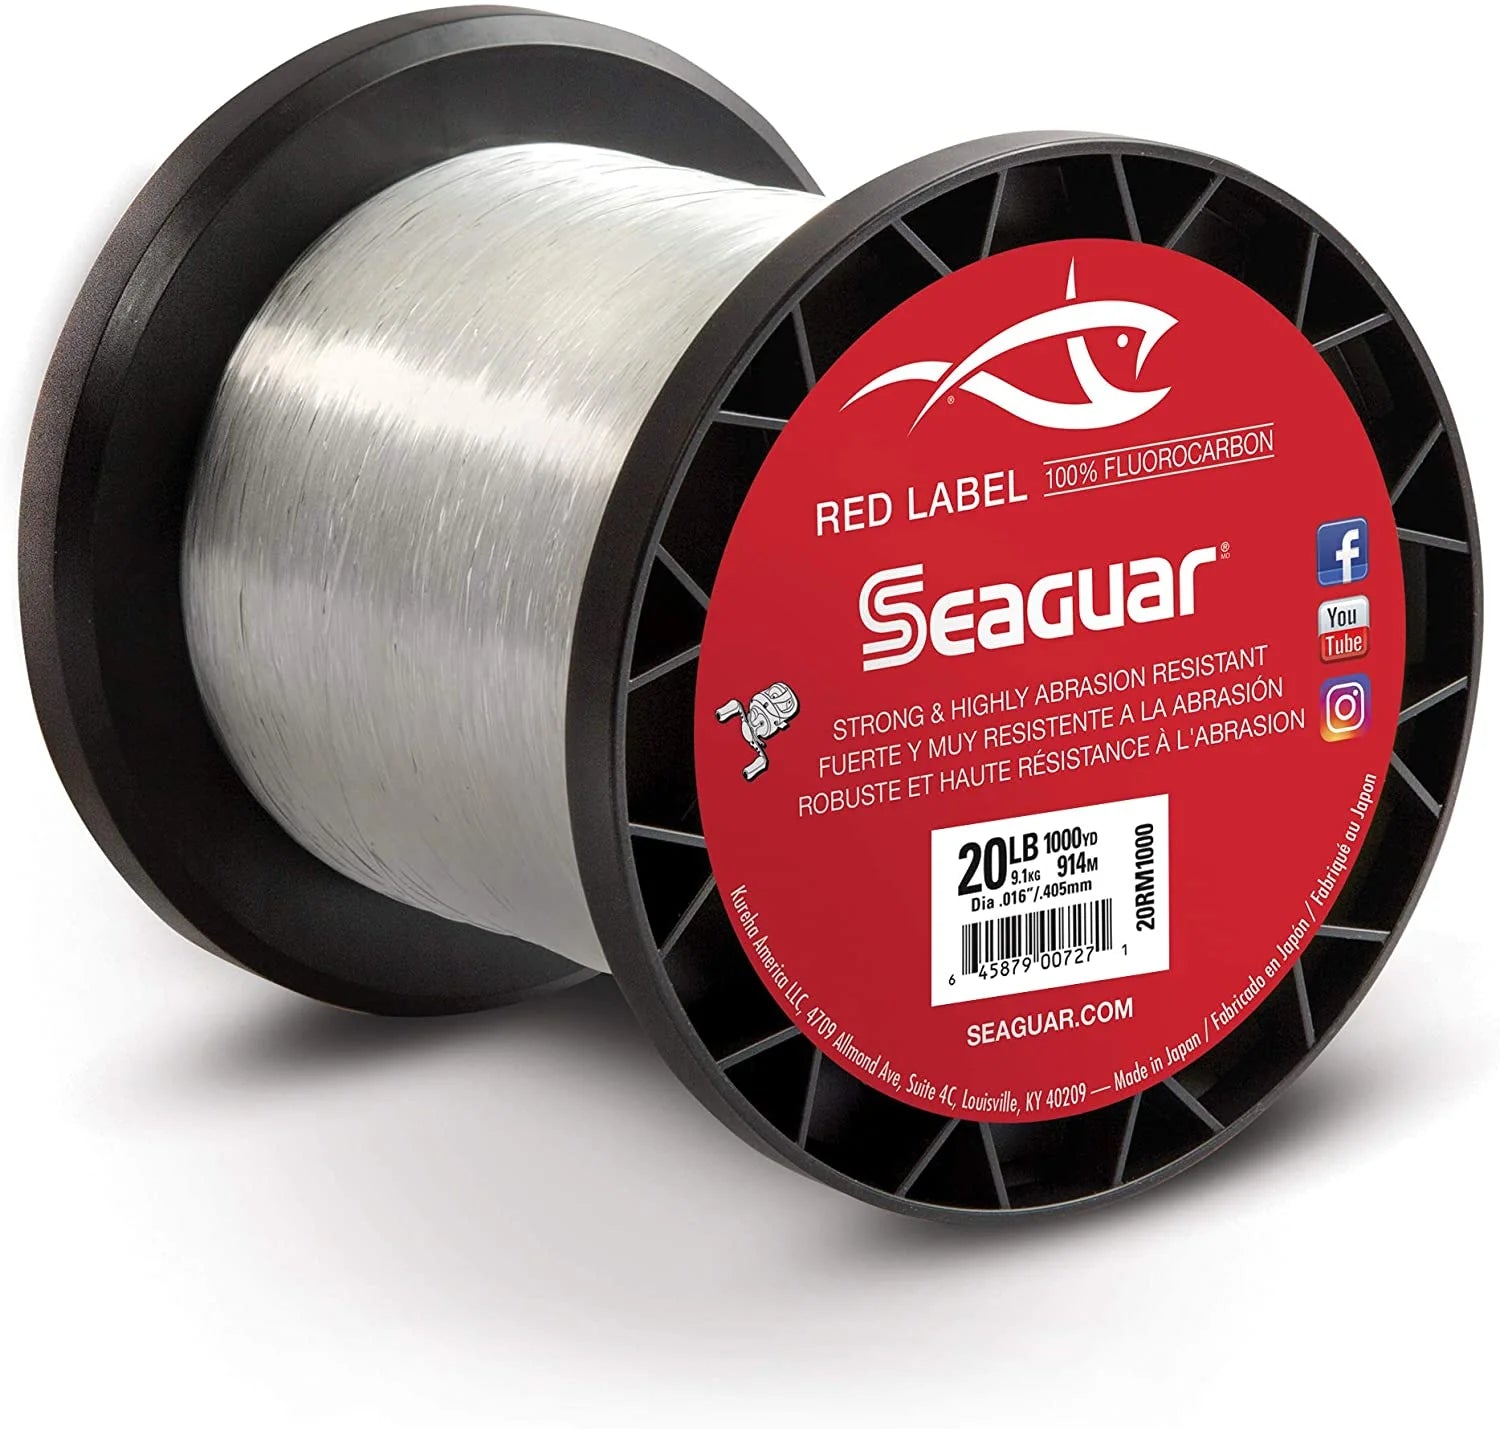 Seaguar Red Label Fluorocarbon 1000 yards Fishing Line